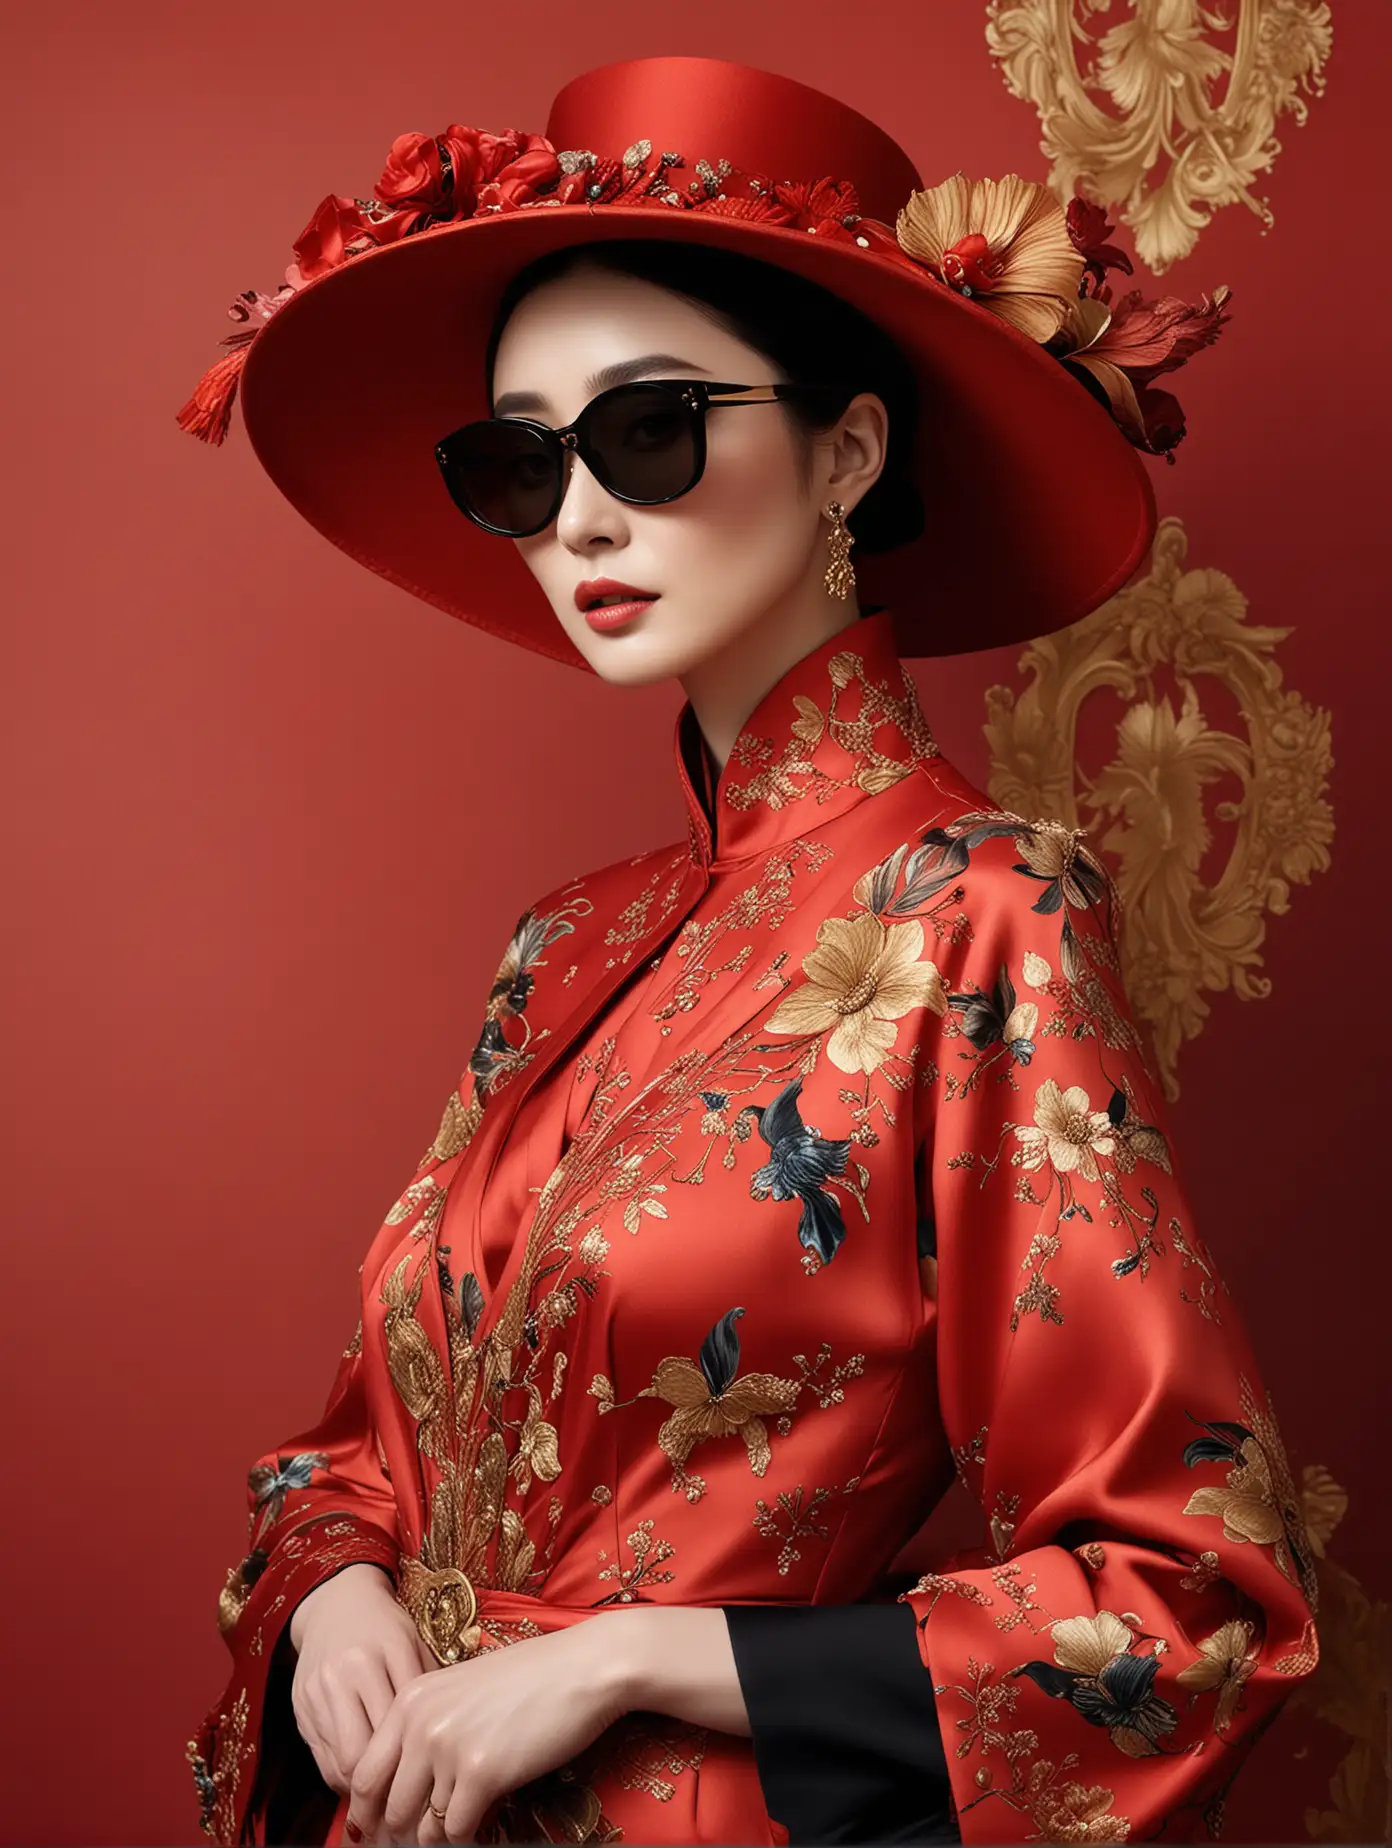 Fan Bingbing , Venetian carnival figure dressed in a designer night dress from either Dior, Gucci, or Armani, topped with an elegant hat, adorned with sunglasses, hands casually placed in pockets, color palette rich in red, golden, and black hues, captured in a Vogue-style fashion, artistic elements echoing the styles of Eiko Ojala and Tracie Grimwood blended with Alberto Seveso's festive touch, fusion of watercolor, soft pastel, and oil accents on a